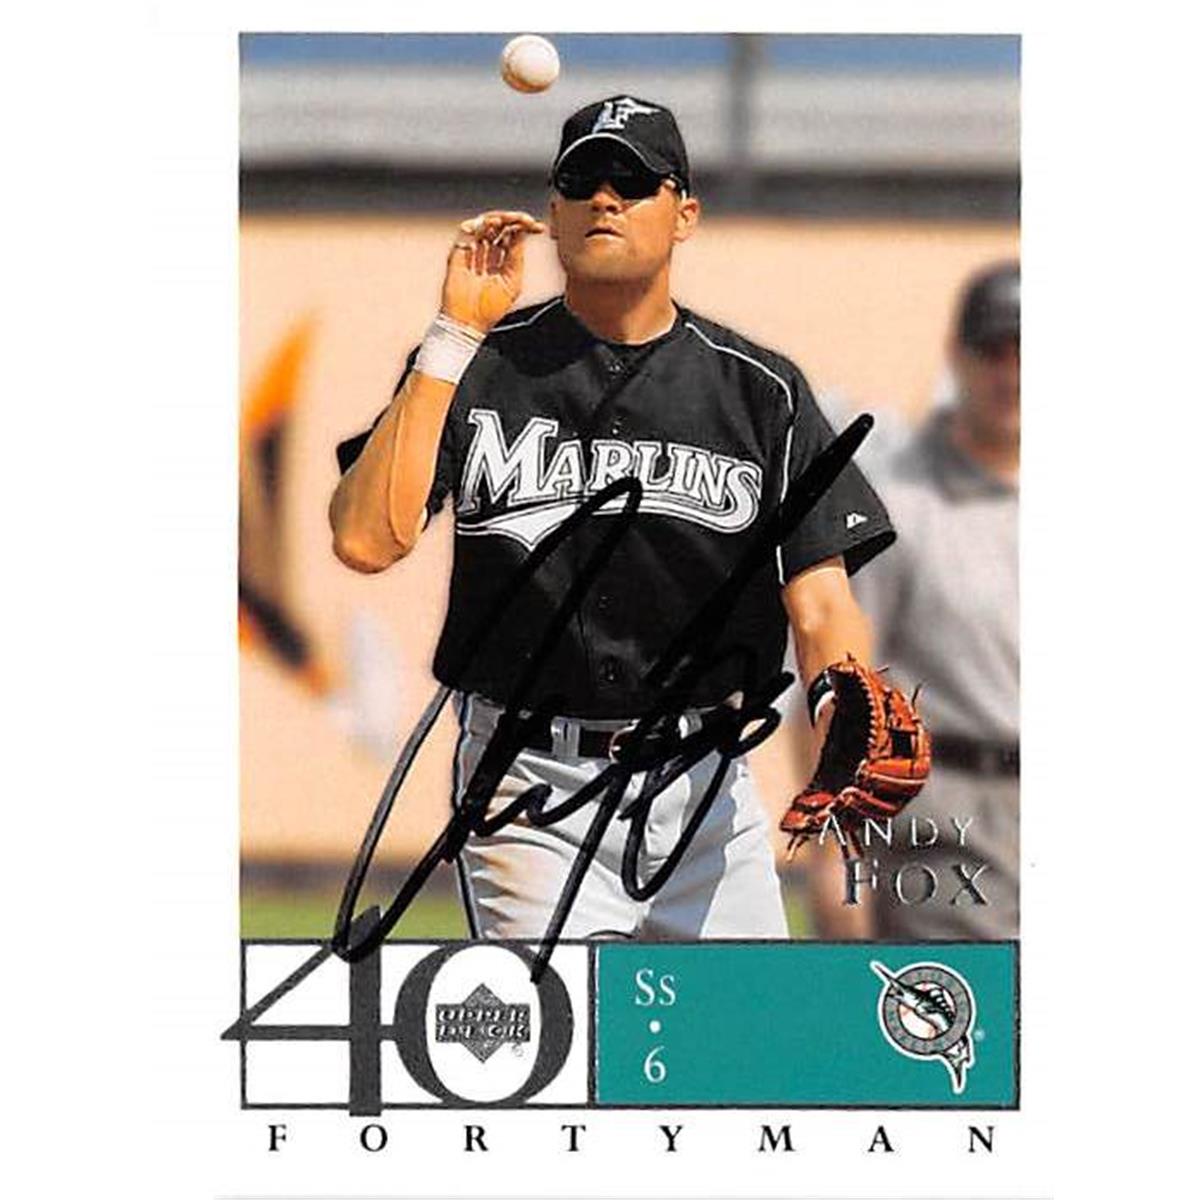 Autograph Warehouse 421292 Andy Fox Autographed Baseball Card Florida Marlins 2003 Upper Deck Forty Man No.603